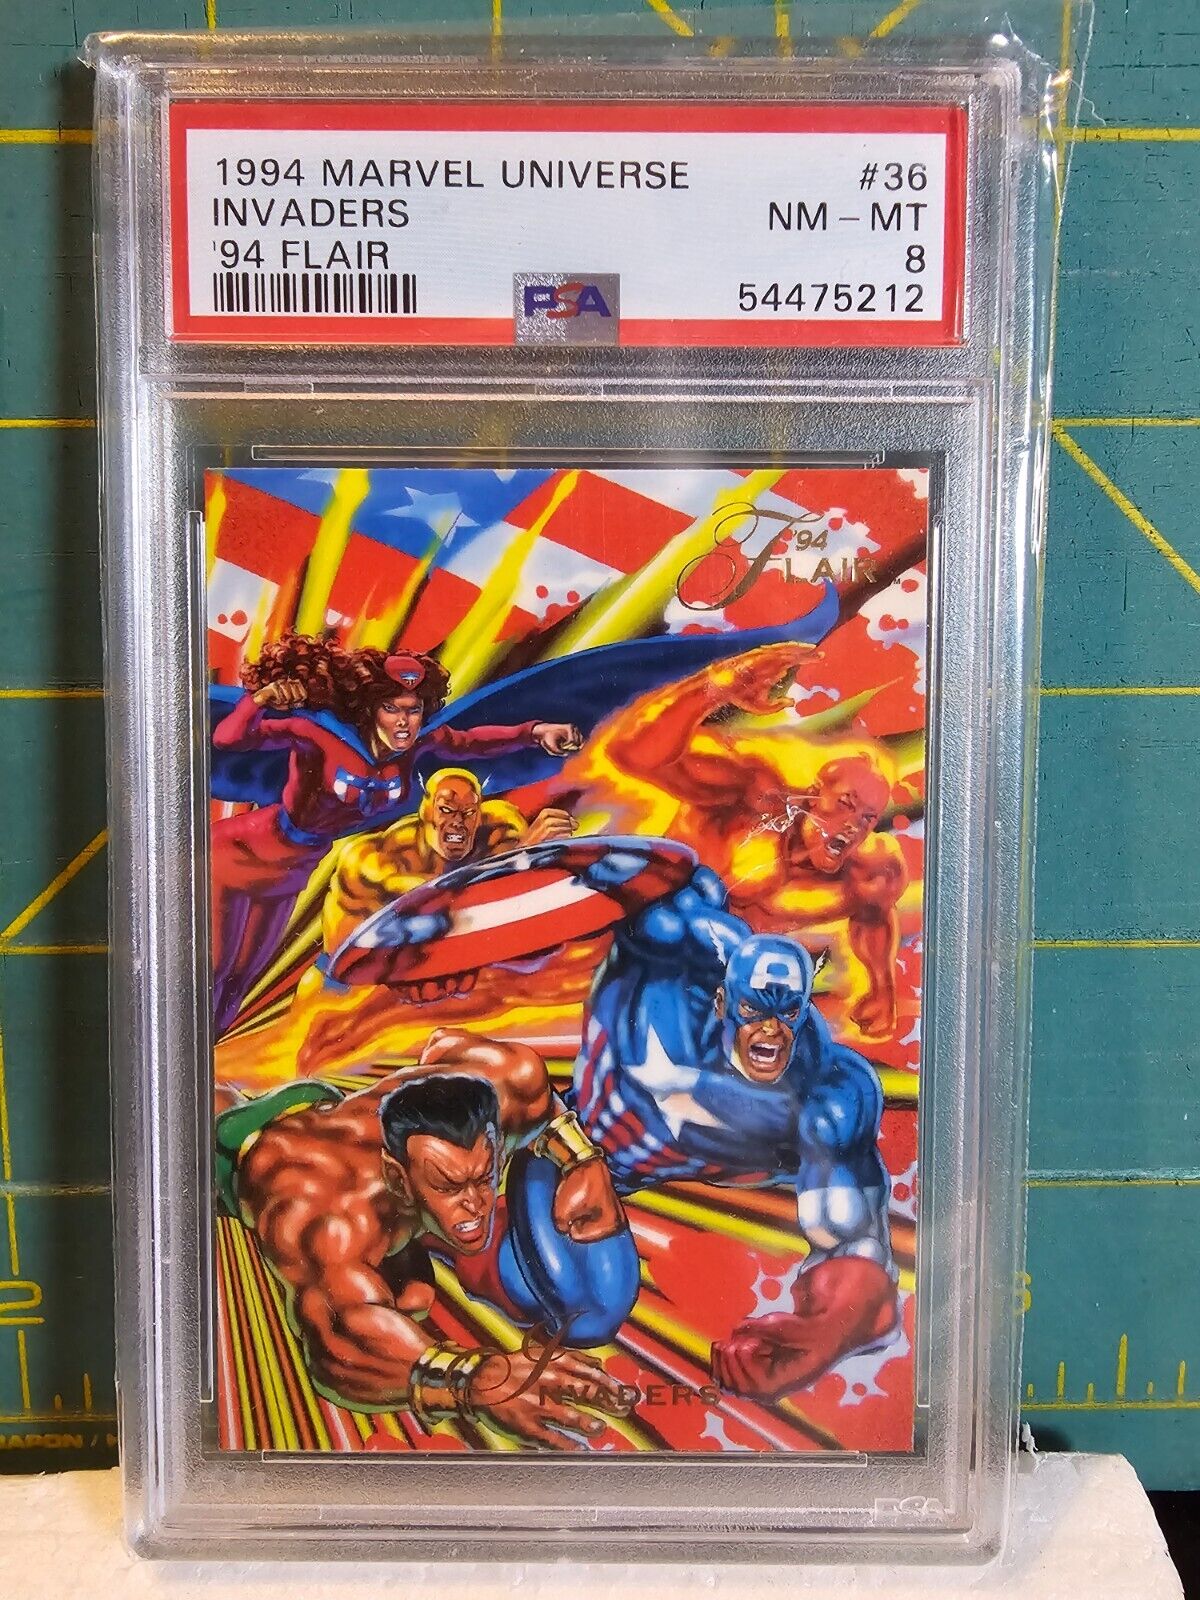 1994 Flair Marvel Universe Inaugural Edition #36 Invaders Graded PSA 8